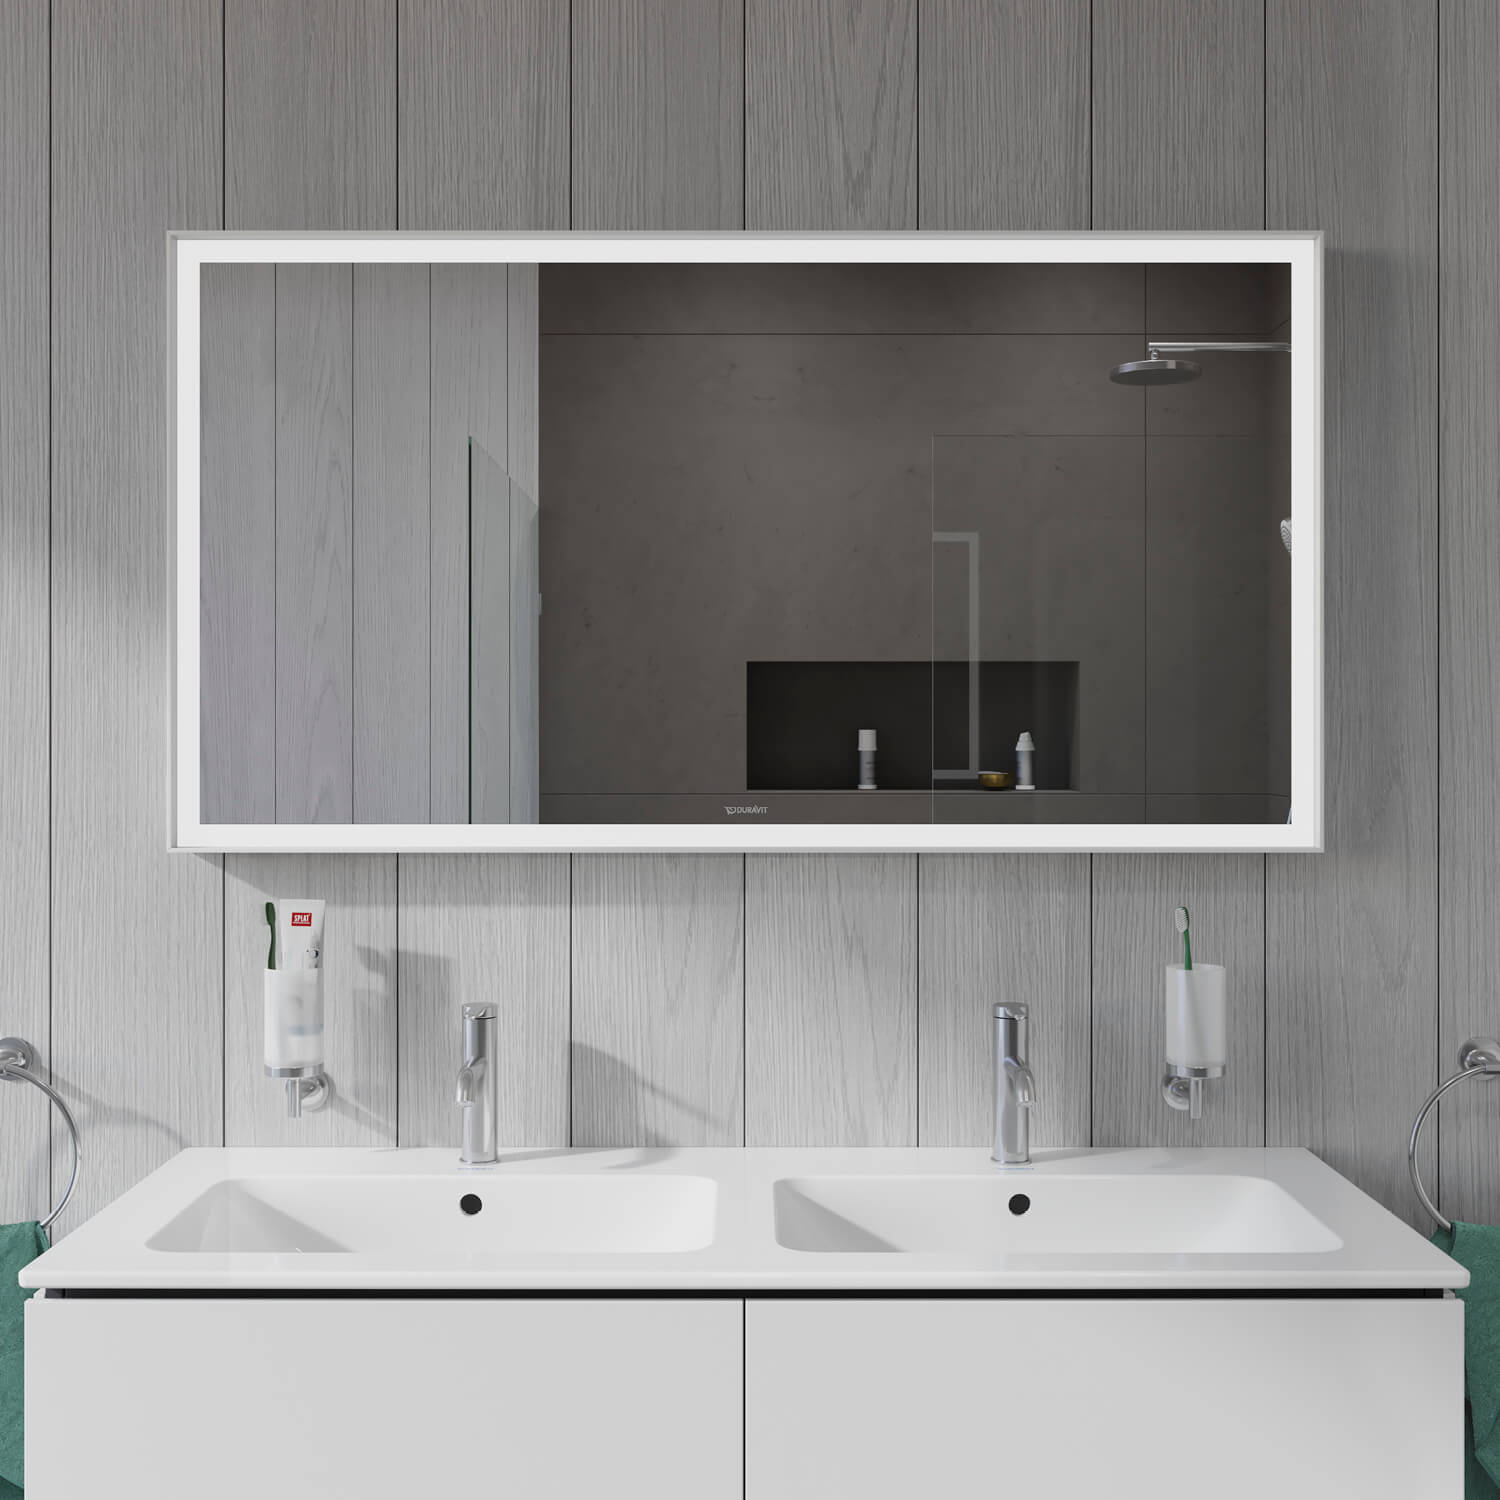 L-Cube mirror ideal for large family bathroom
